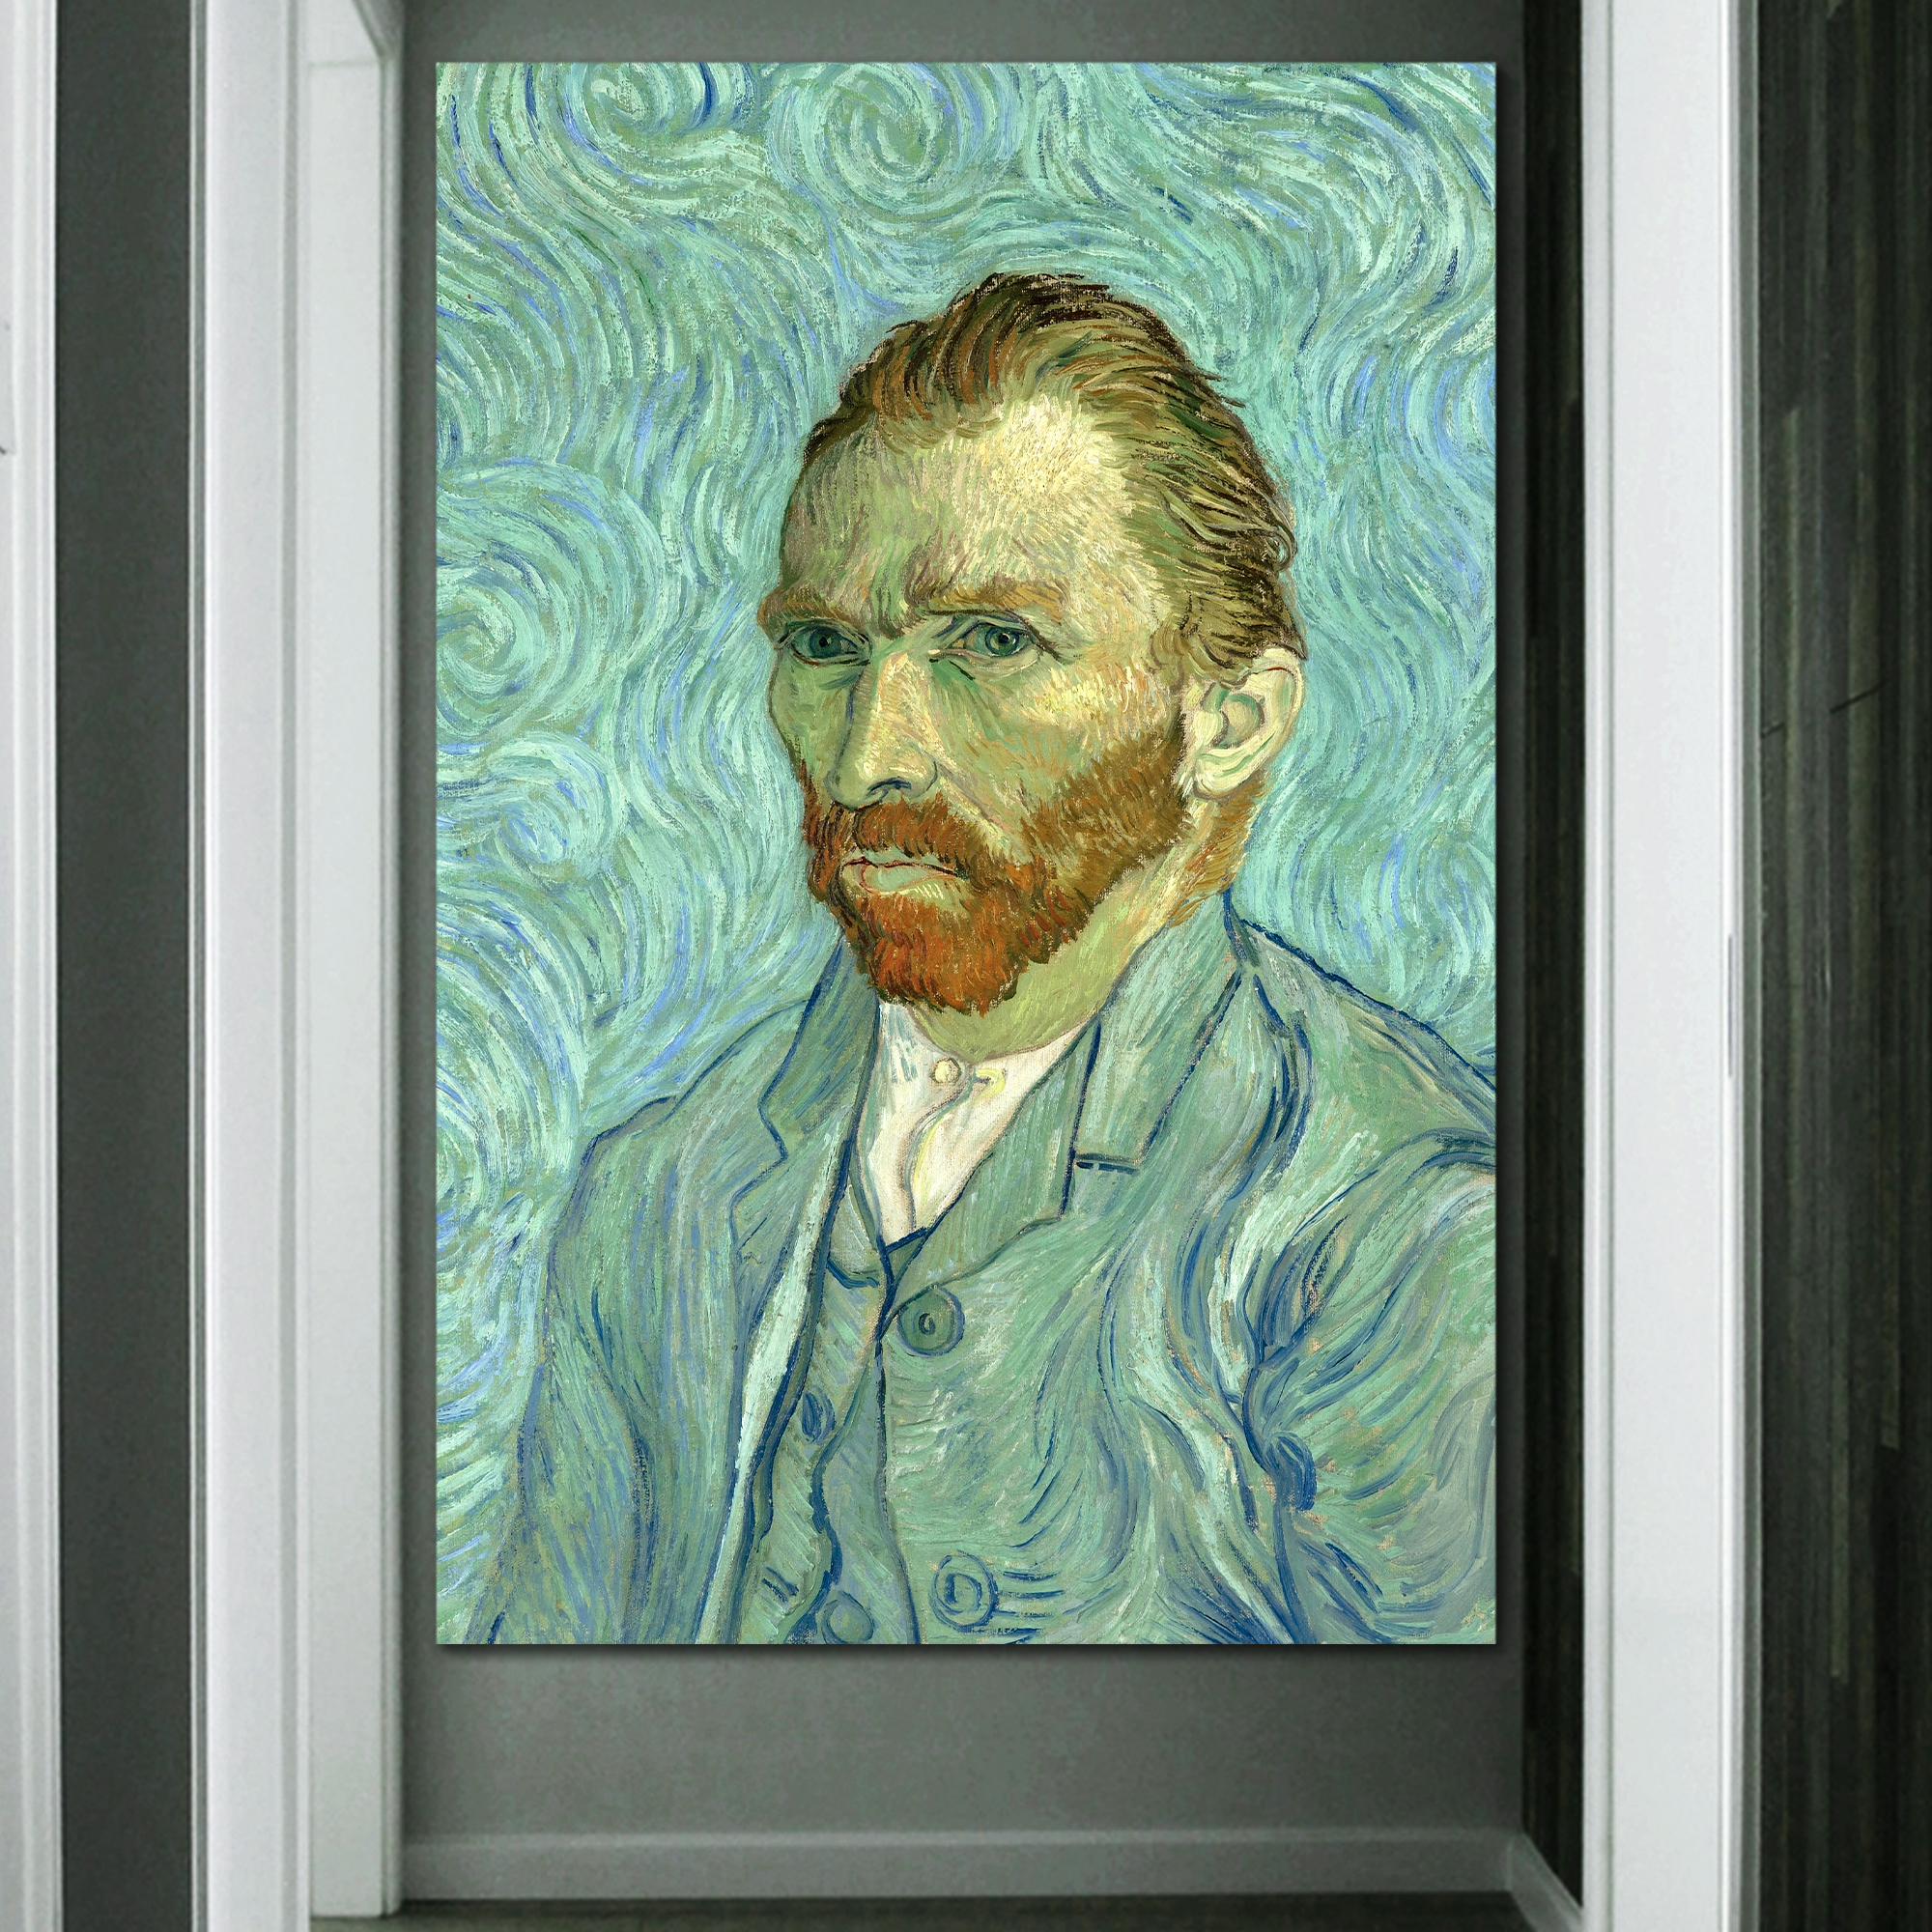 Self Portrait by Van Gogh Giclee Canvas Prints Wrapped Gallery Wall Art | Stretched and Framed Ready to Hang - 24